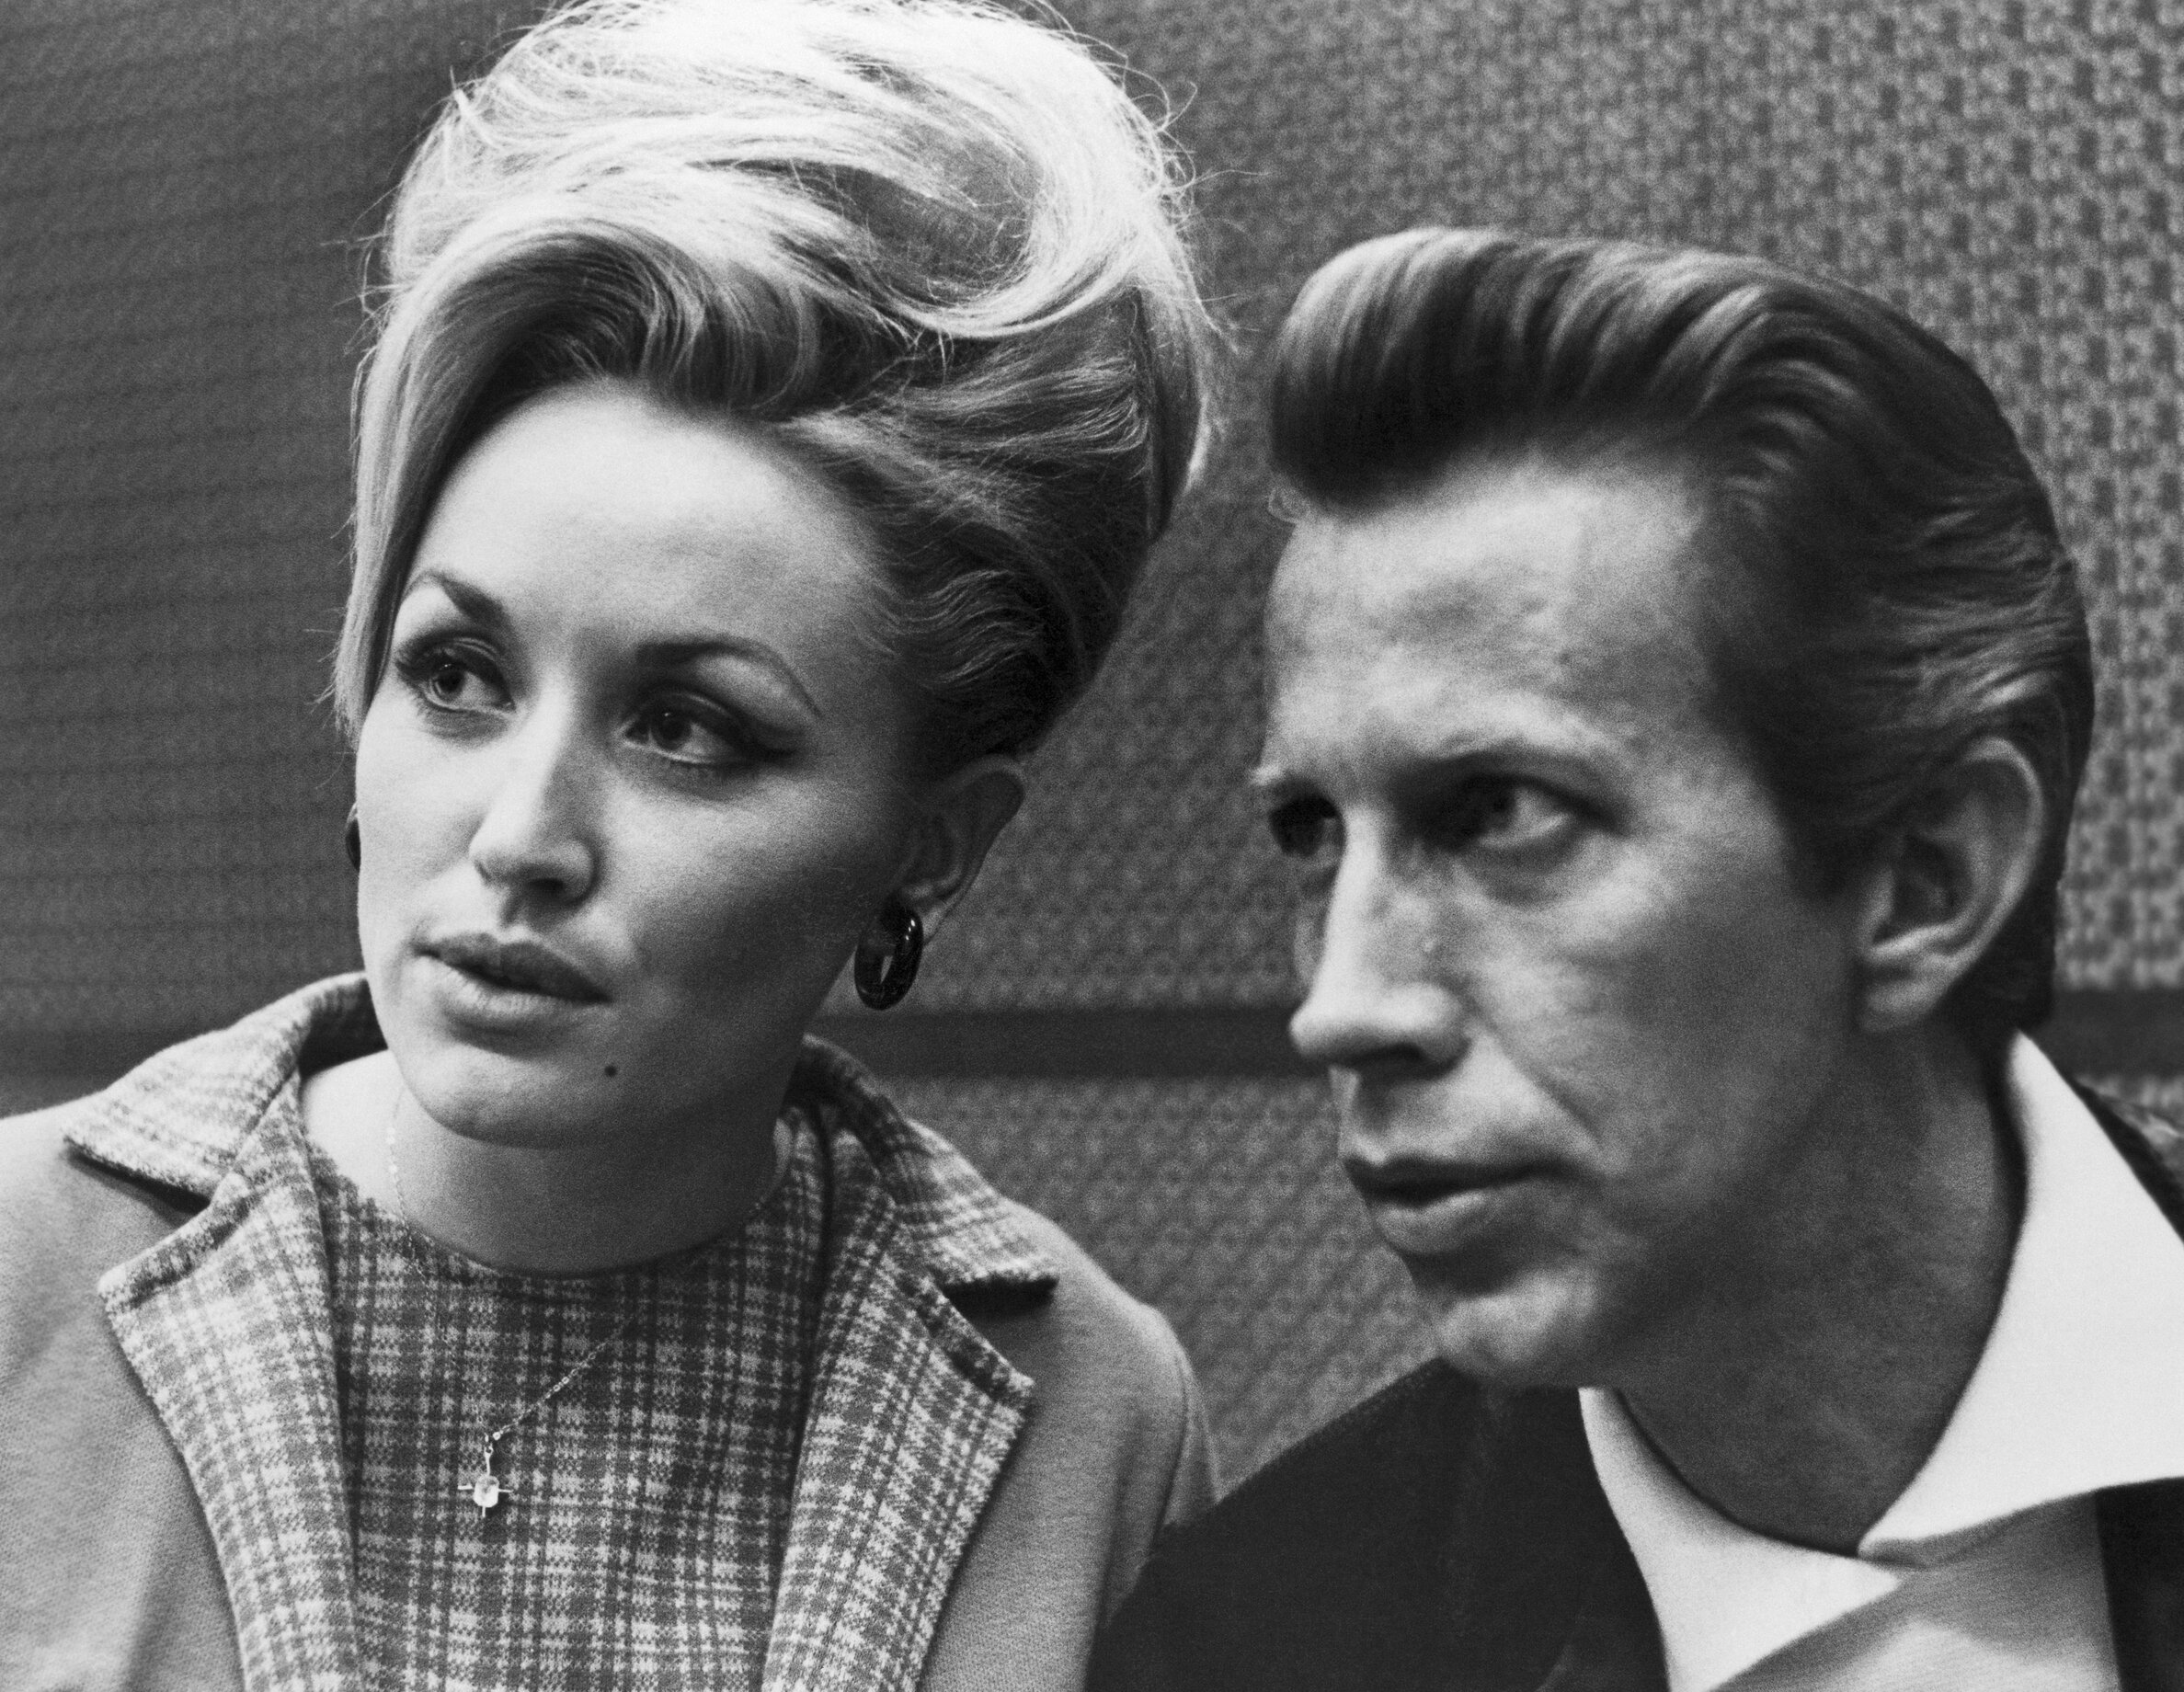 Dolly Parton and Porter Wagoner close-up in black and white. The year is 1968.